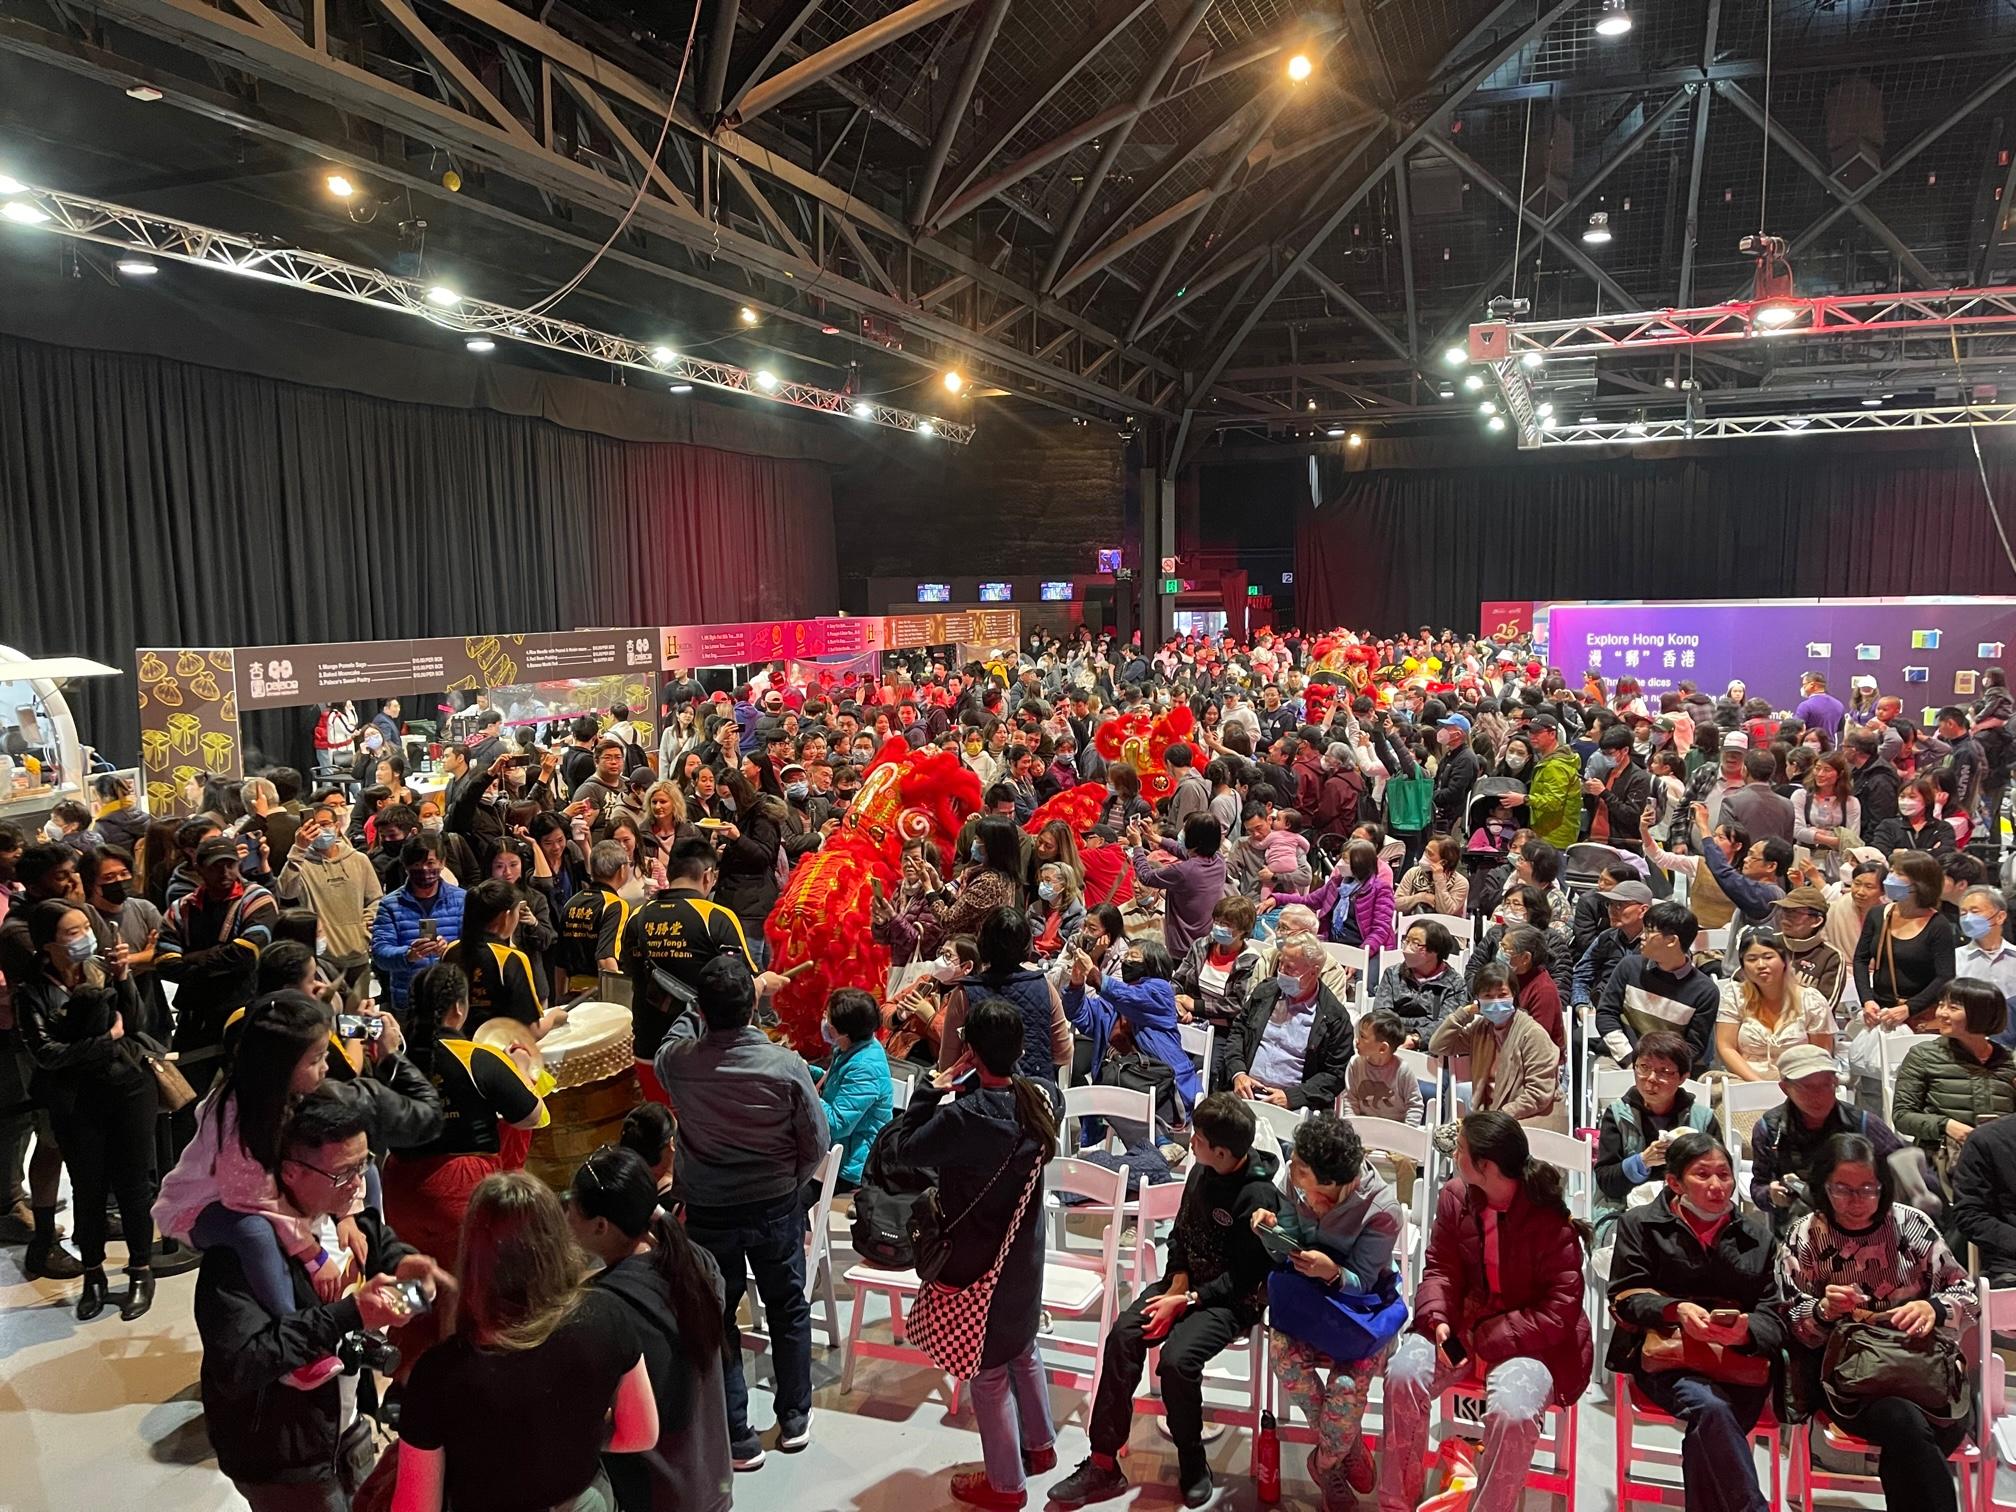 Experience Hong Kong was held in Sydney, Australia, today (August 27) for members of the public to share the joy of the 25th anniversary of the establishment of the Hong Kong Special Administrative Region. Over 10 000 people attended the event.
